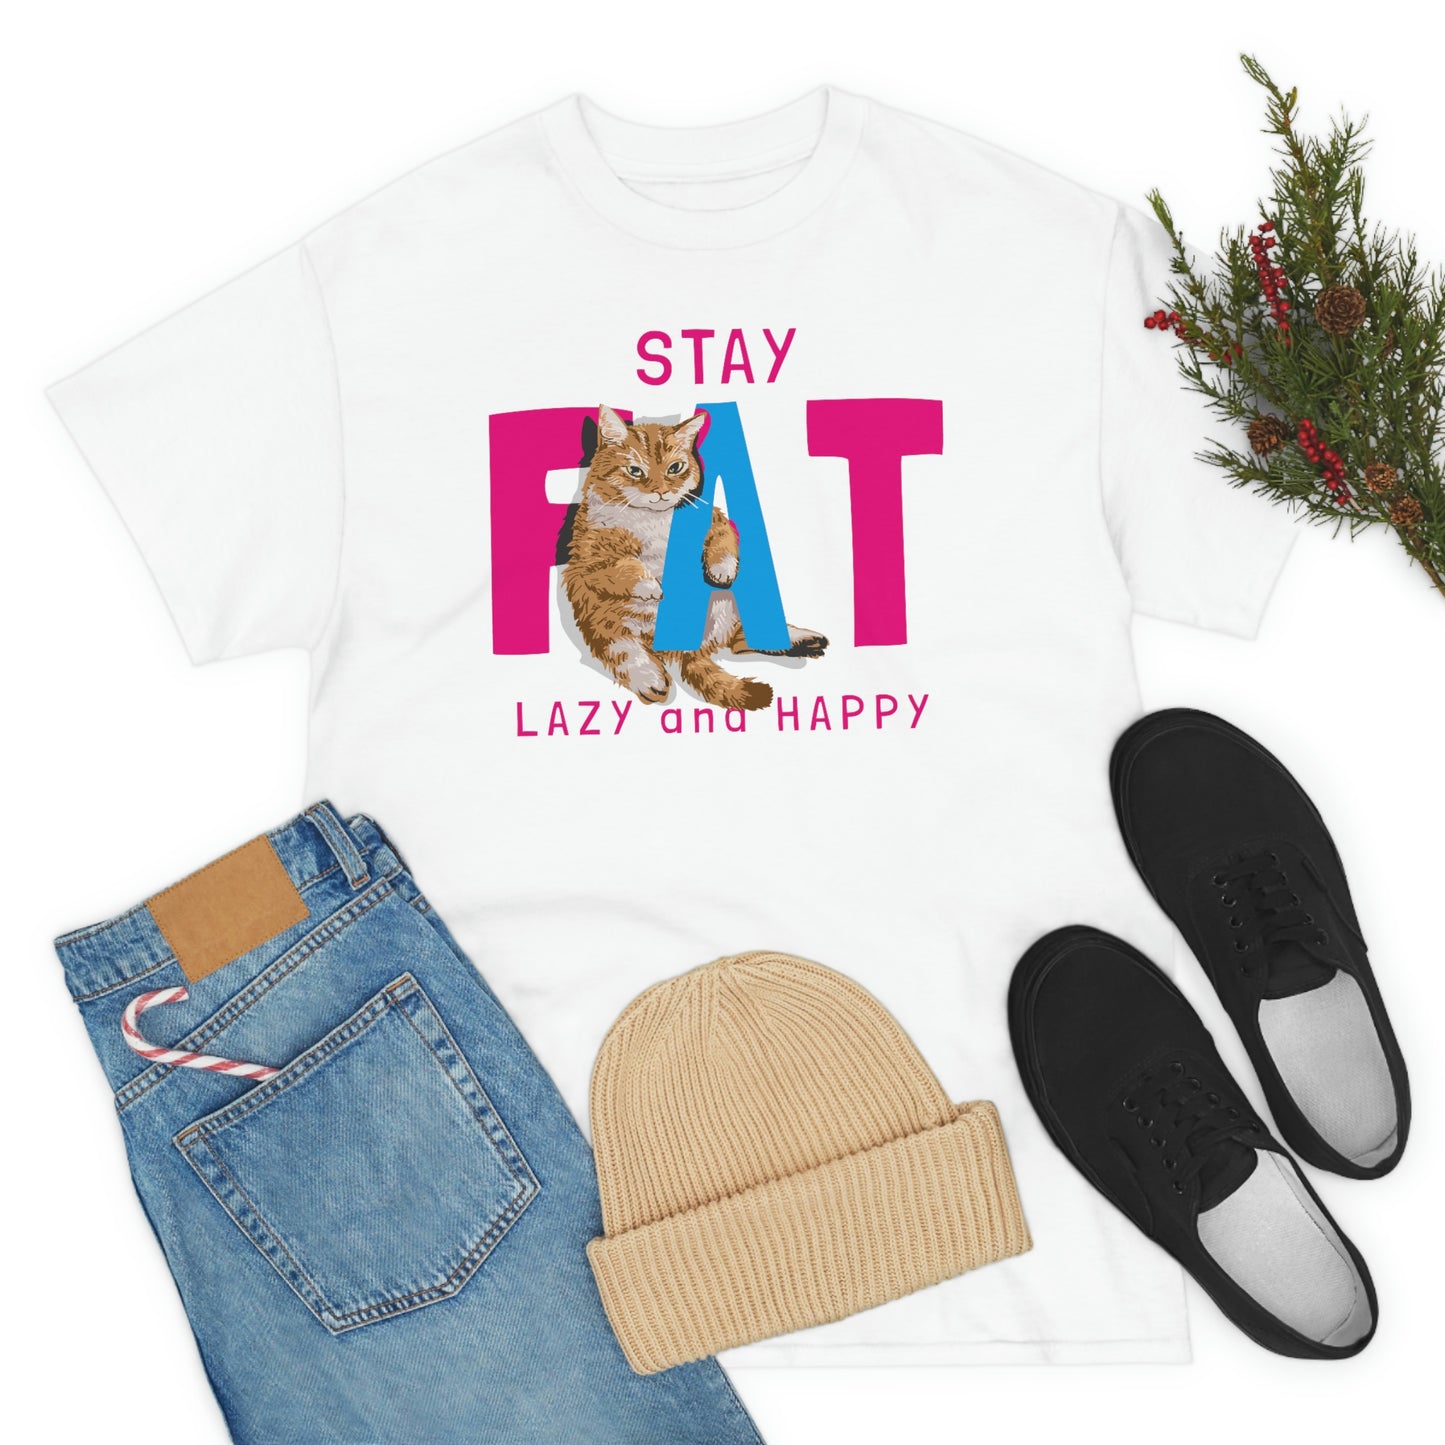 Stay Fat, lazy and happy